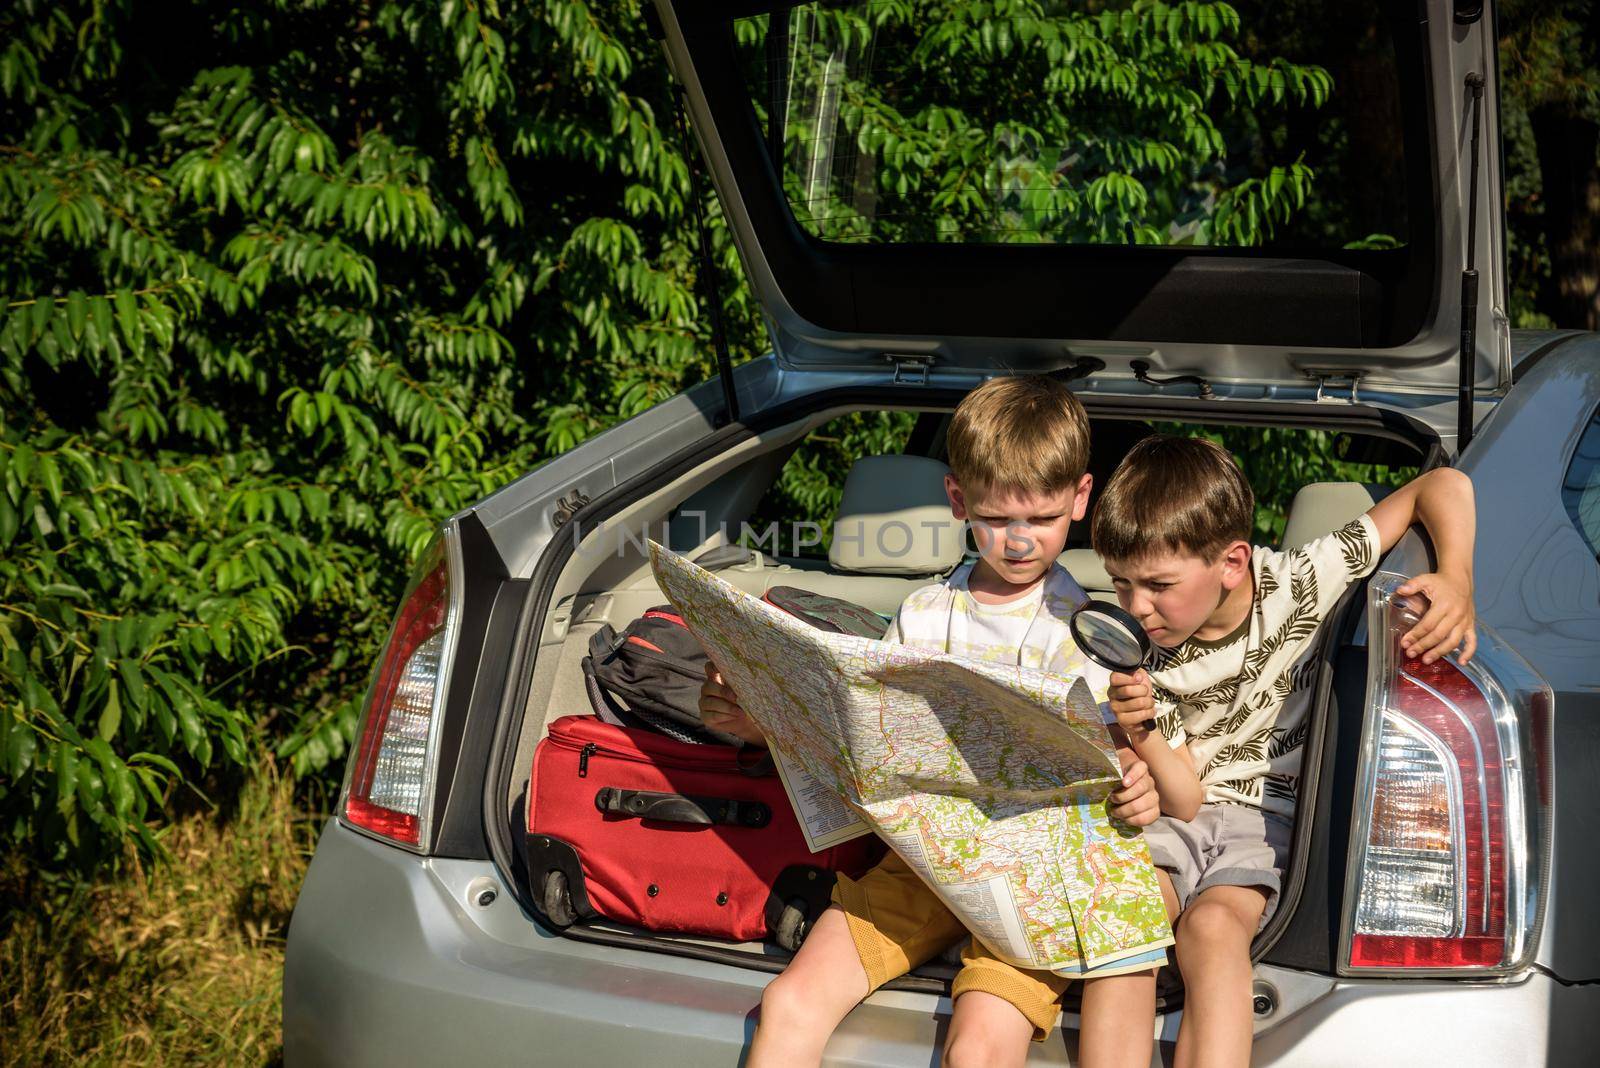 Two cute boys sitting in a car trunk before going on vacations with their parents. Kids sitting in a car examining a map. Summer break at school. Family travel by car by Kobysh